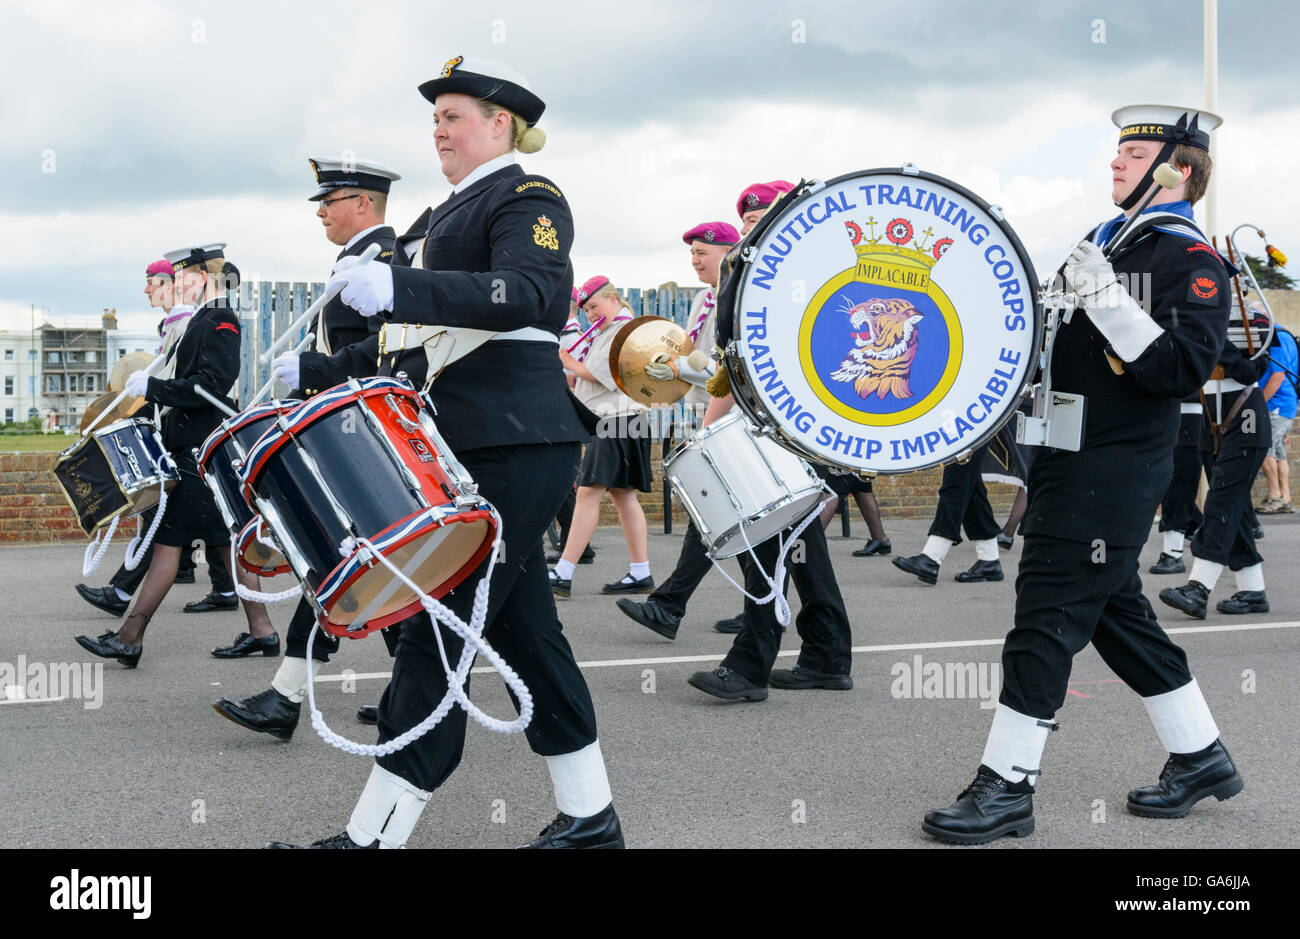 Military marching band in uniform playing drums. Stock Photo